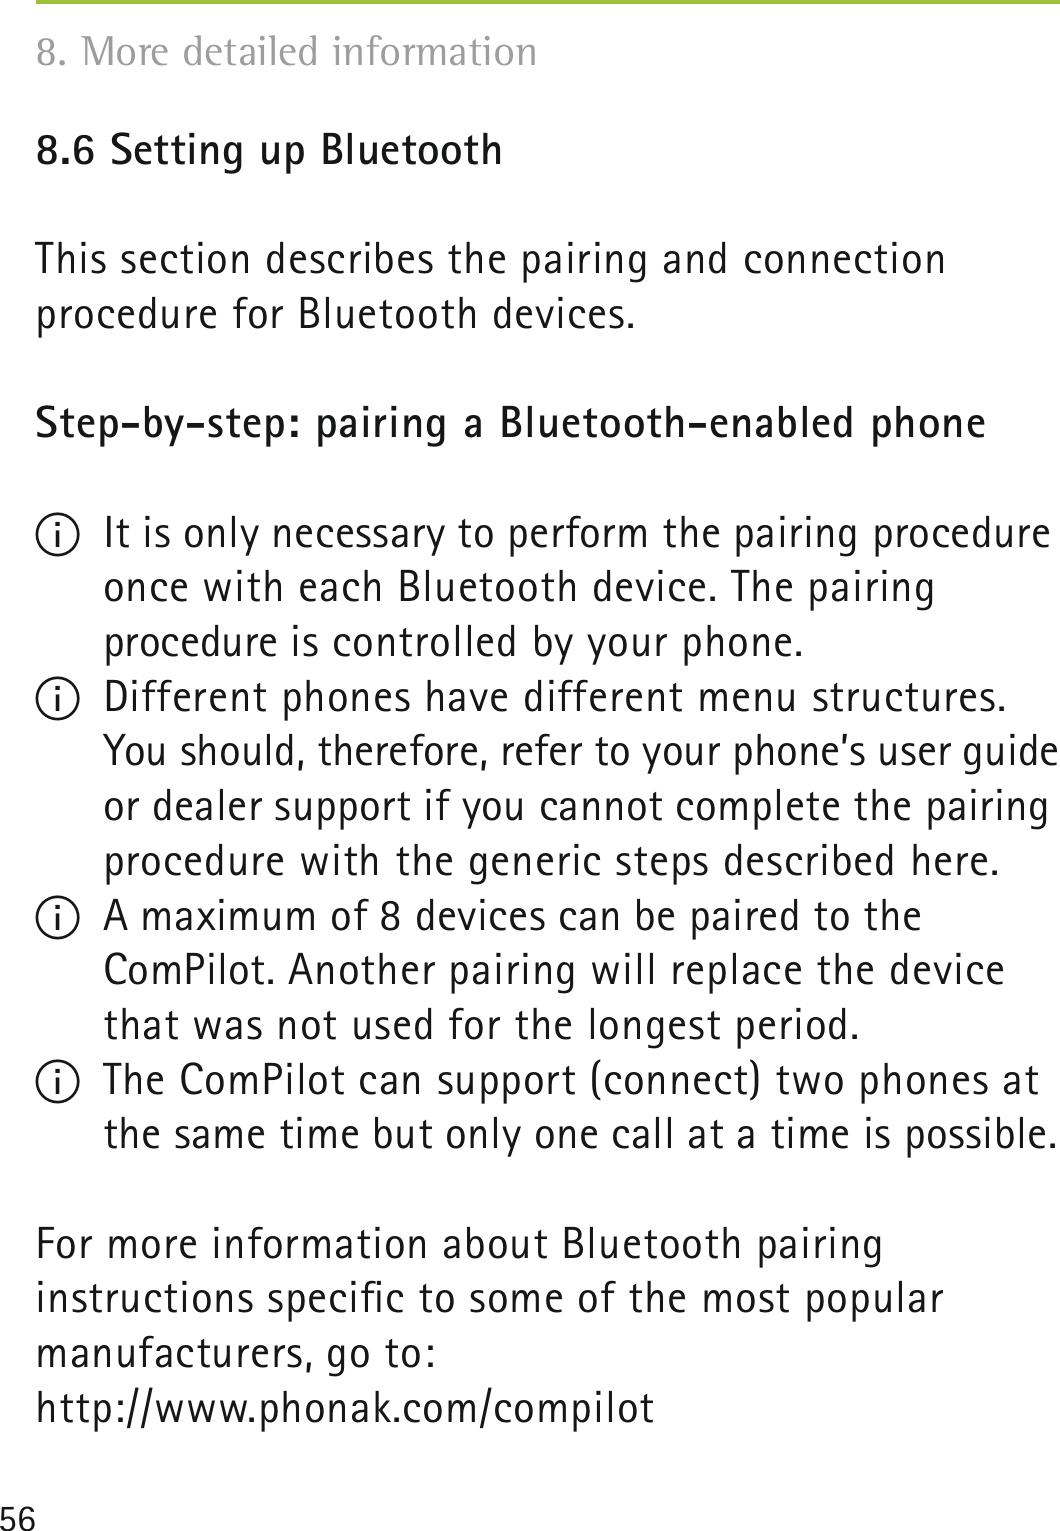 568.6 Setting up Bluetooth This section describes the pairing and connection  procedure for Bluetooth devices.Step-by-step: pairing a Bluetooth-enabled phone I  It is only necessary to perform the pairing procedure once with each Bluetooth device. The pairing  procedure is controlled by your phone.I  Different phones have different menu structures. You should, therefore, refer to your phone’s user guide or dealer support if you cannot complete the pairing procedure with the generic steps described here. I  A maximum of 8 devices can be paired to the  ComPilot. Another pairing will replace the device that was not used for the longest period.I  The ComPilot can support (connect) two phones at the same time but only one call at a time is possible.For more information about Bluetooth pairing  instructions speciﬁc to some of the most popular manufacturers, go to: http://www.phonak.com/compilot8. More detailed information 